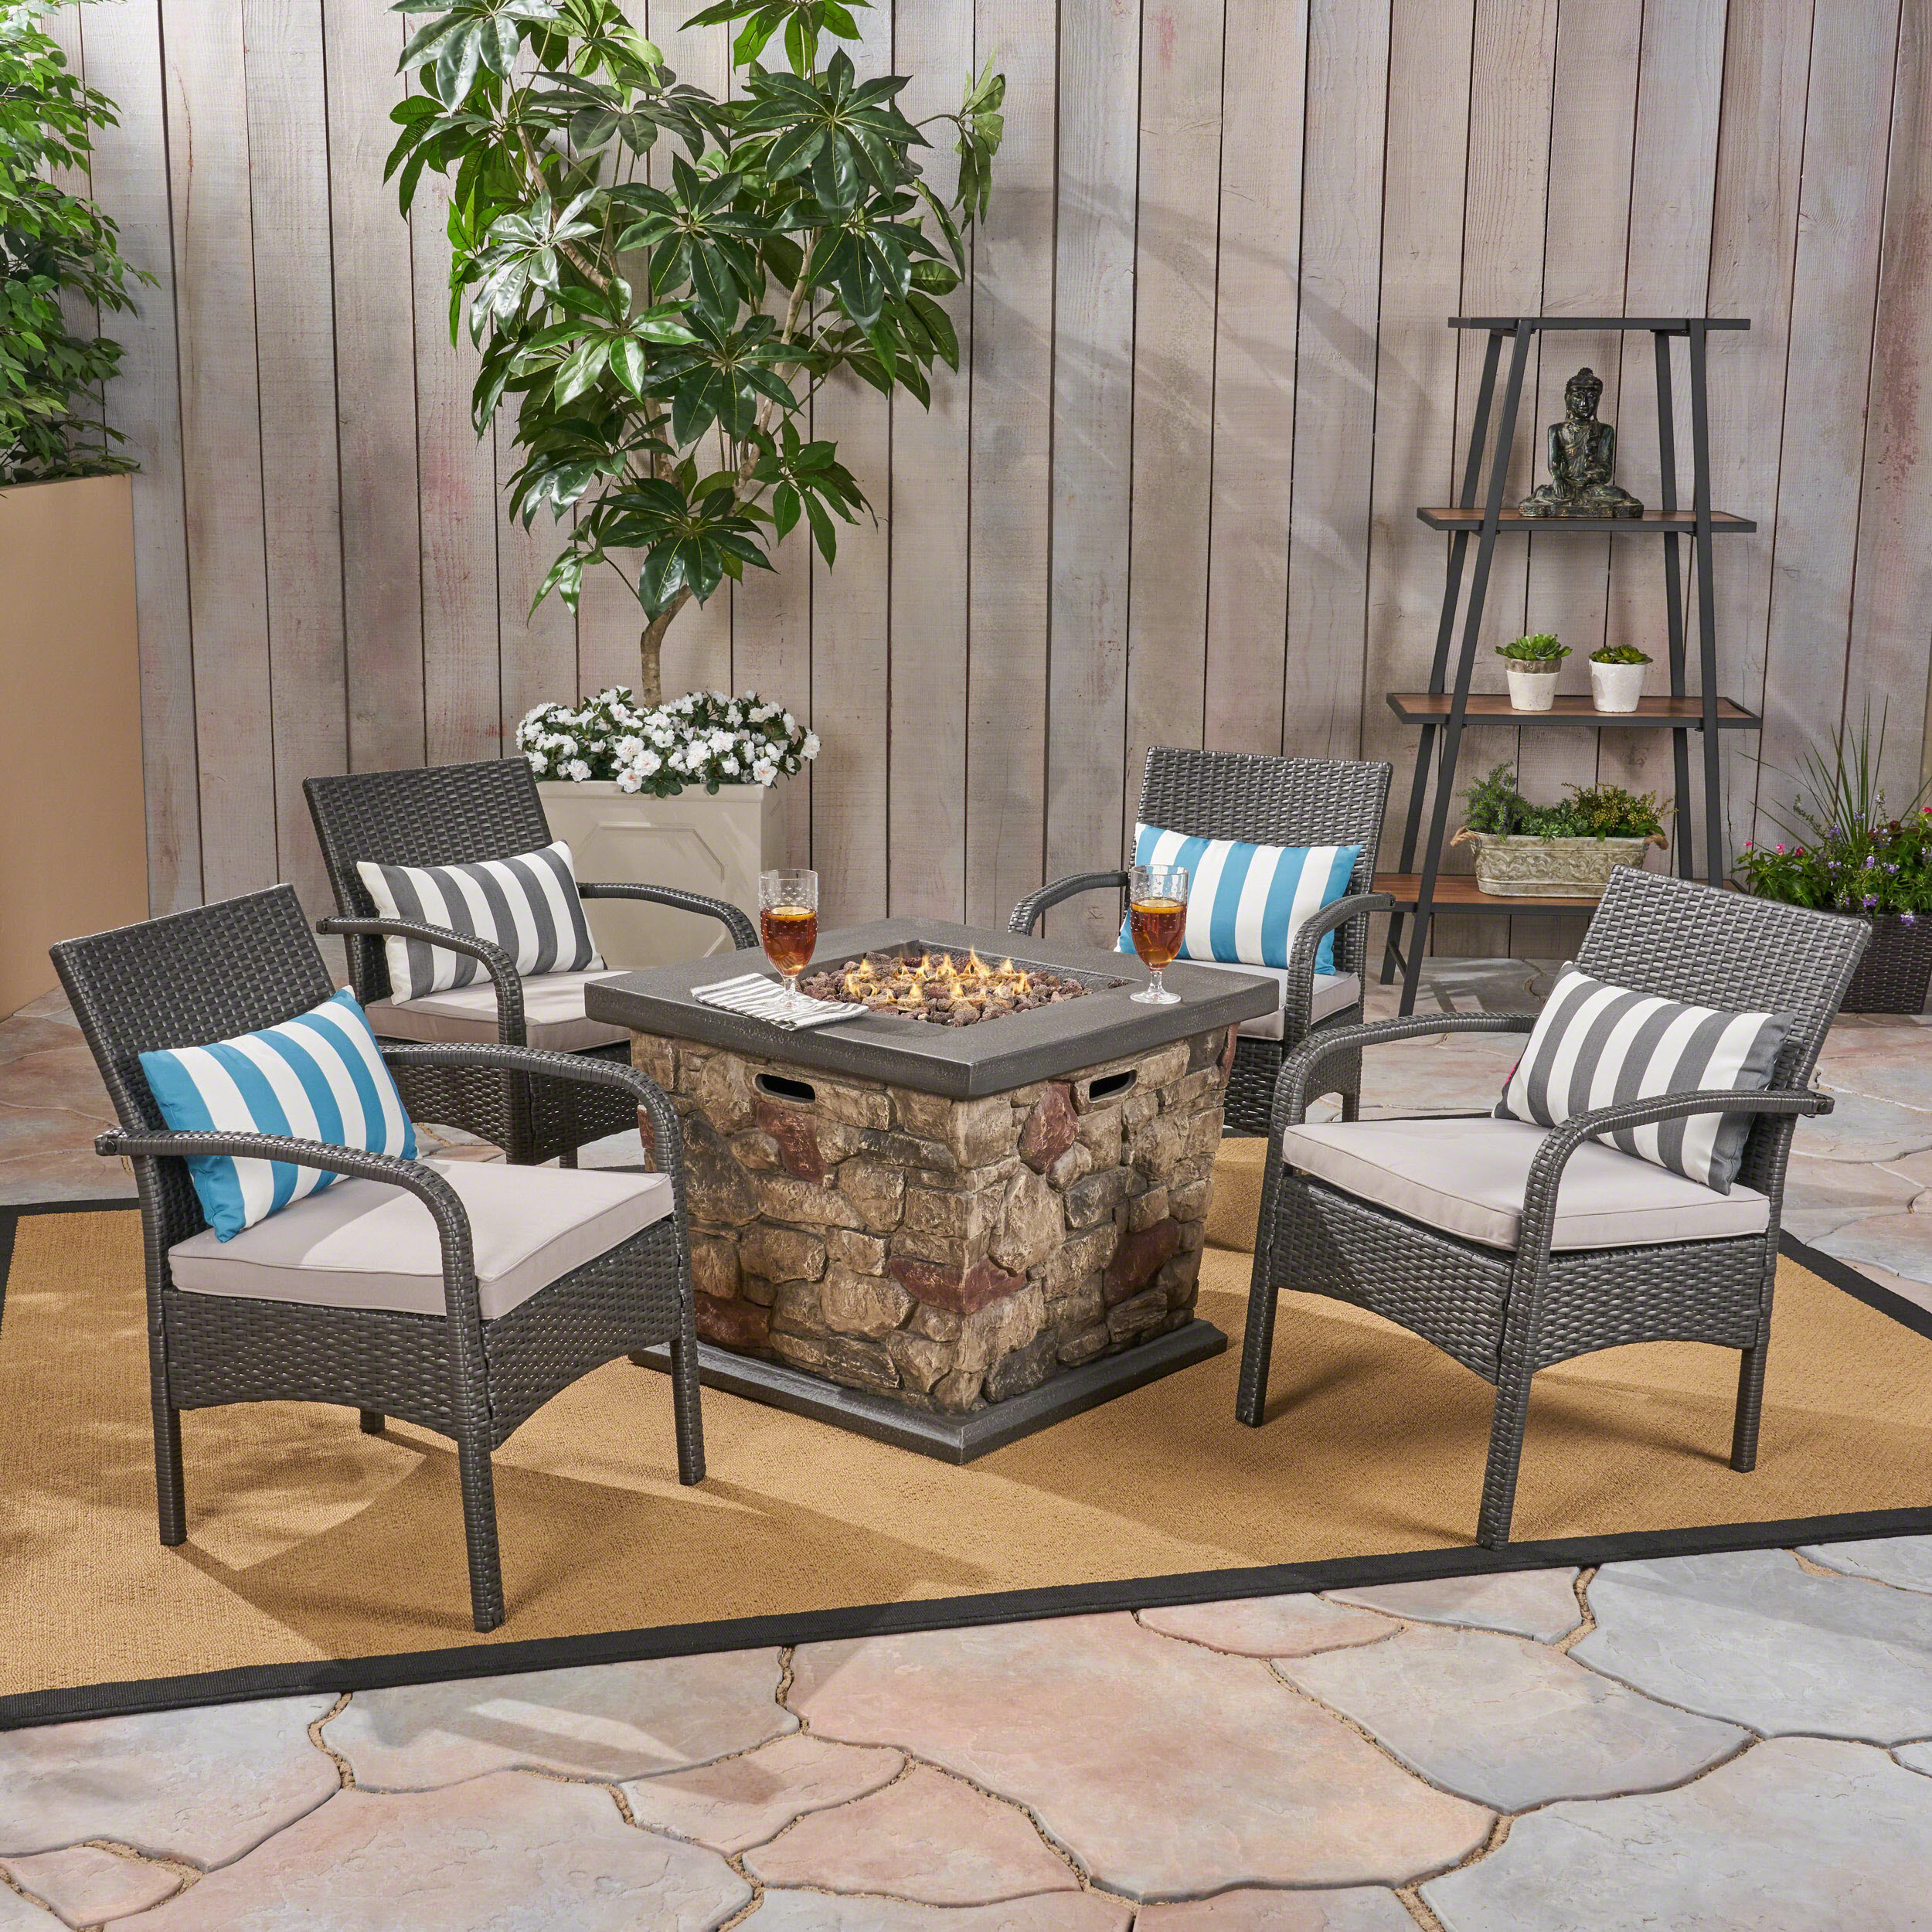 Capitan Outdoor Wicker 5 Piece Patio Chat Set with Stone Finished Fire Pit